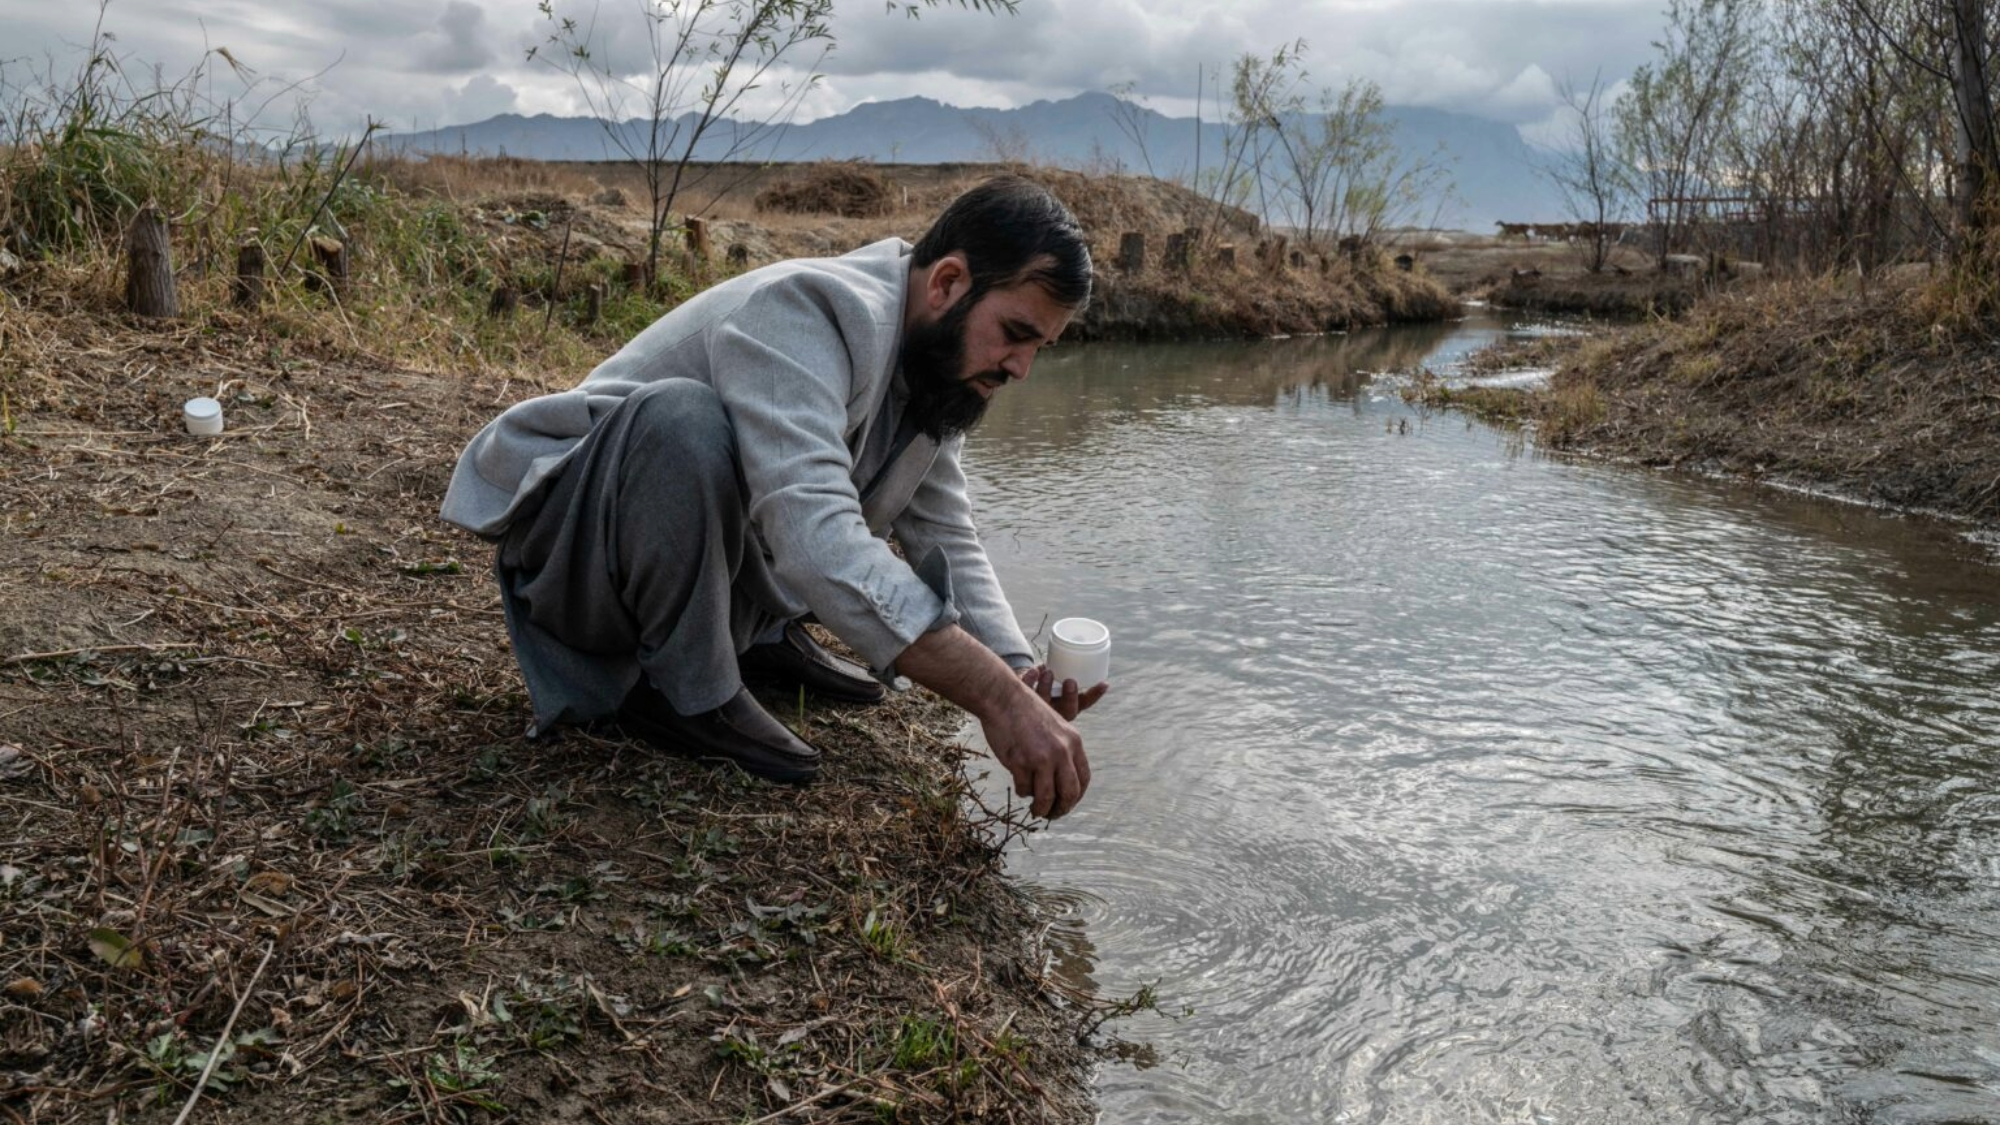 America’s war in Afghanistan devastated the country’s environment in ways that may never be cleaned up